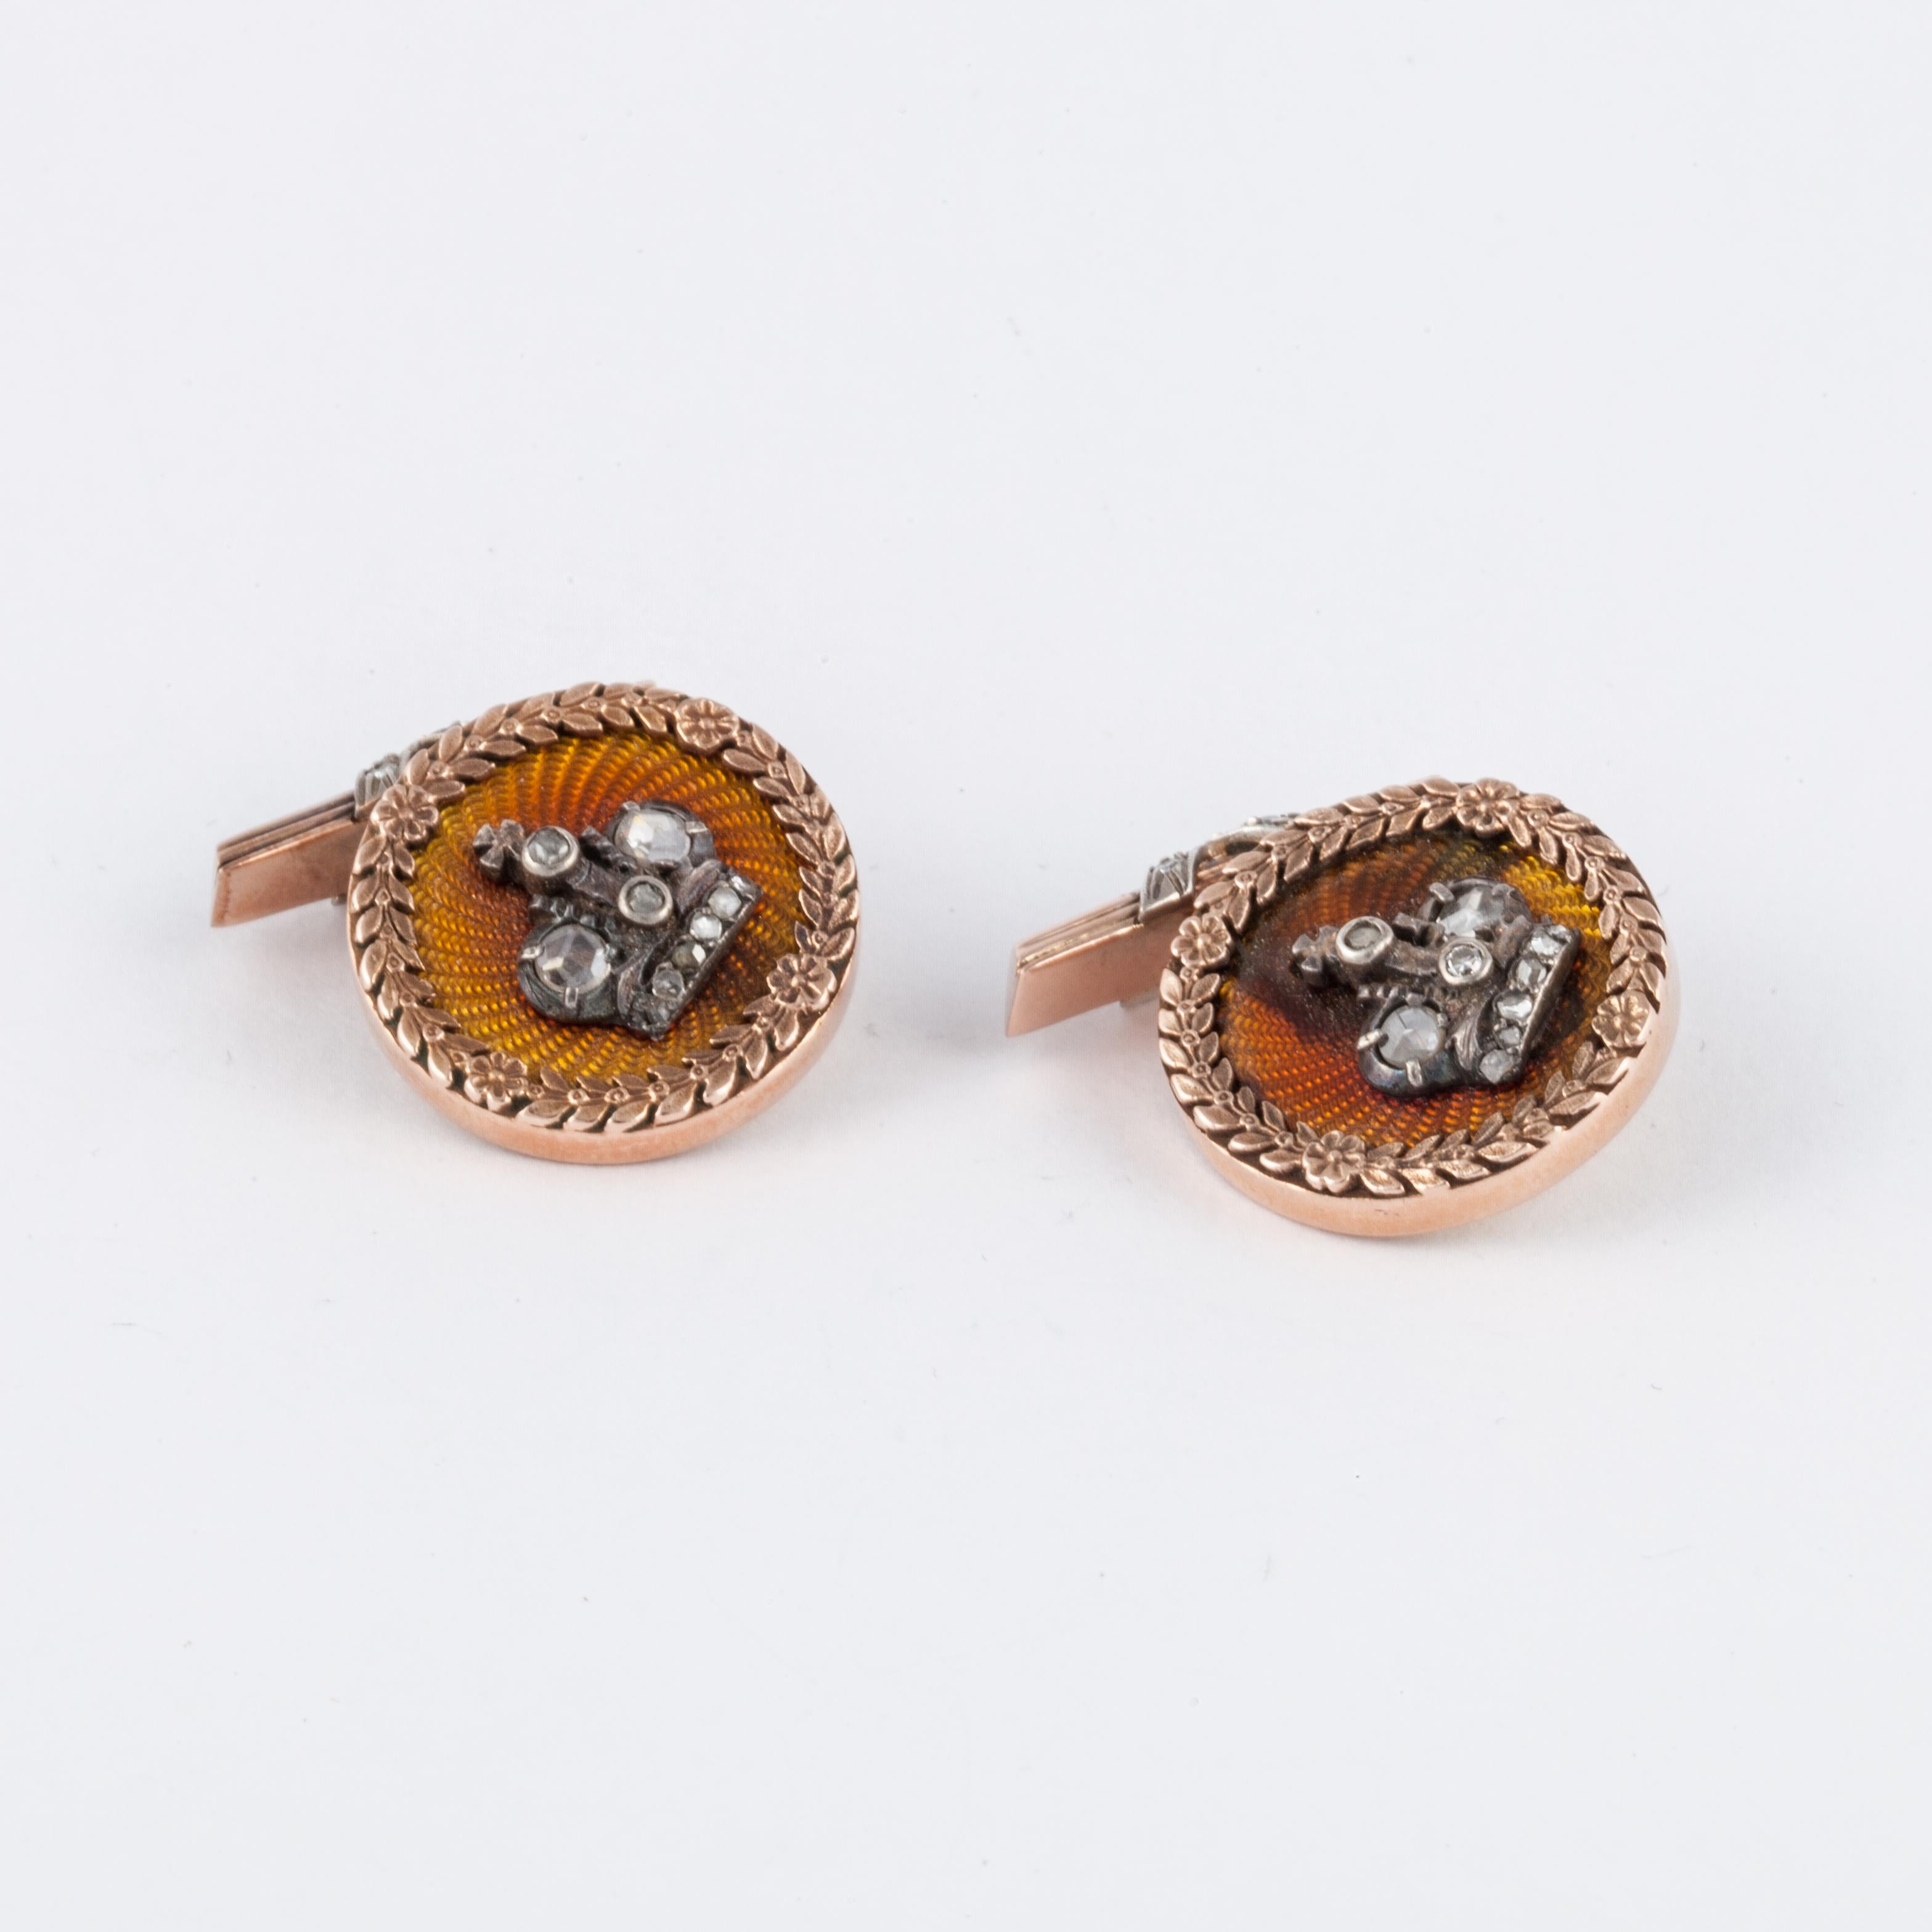 14K rose gold cufflinks with Russian hallmarks.  The background is a golden enamel with a crown on top accented with diamonds.  There are a total of 19 diamonds weighing 0.46 carats.  Measure 3/4 inches in diameter. 